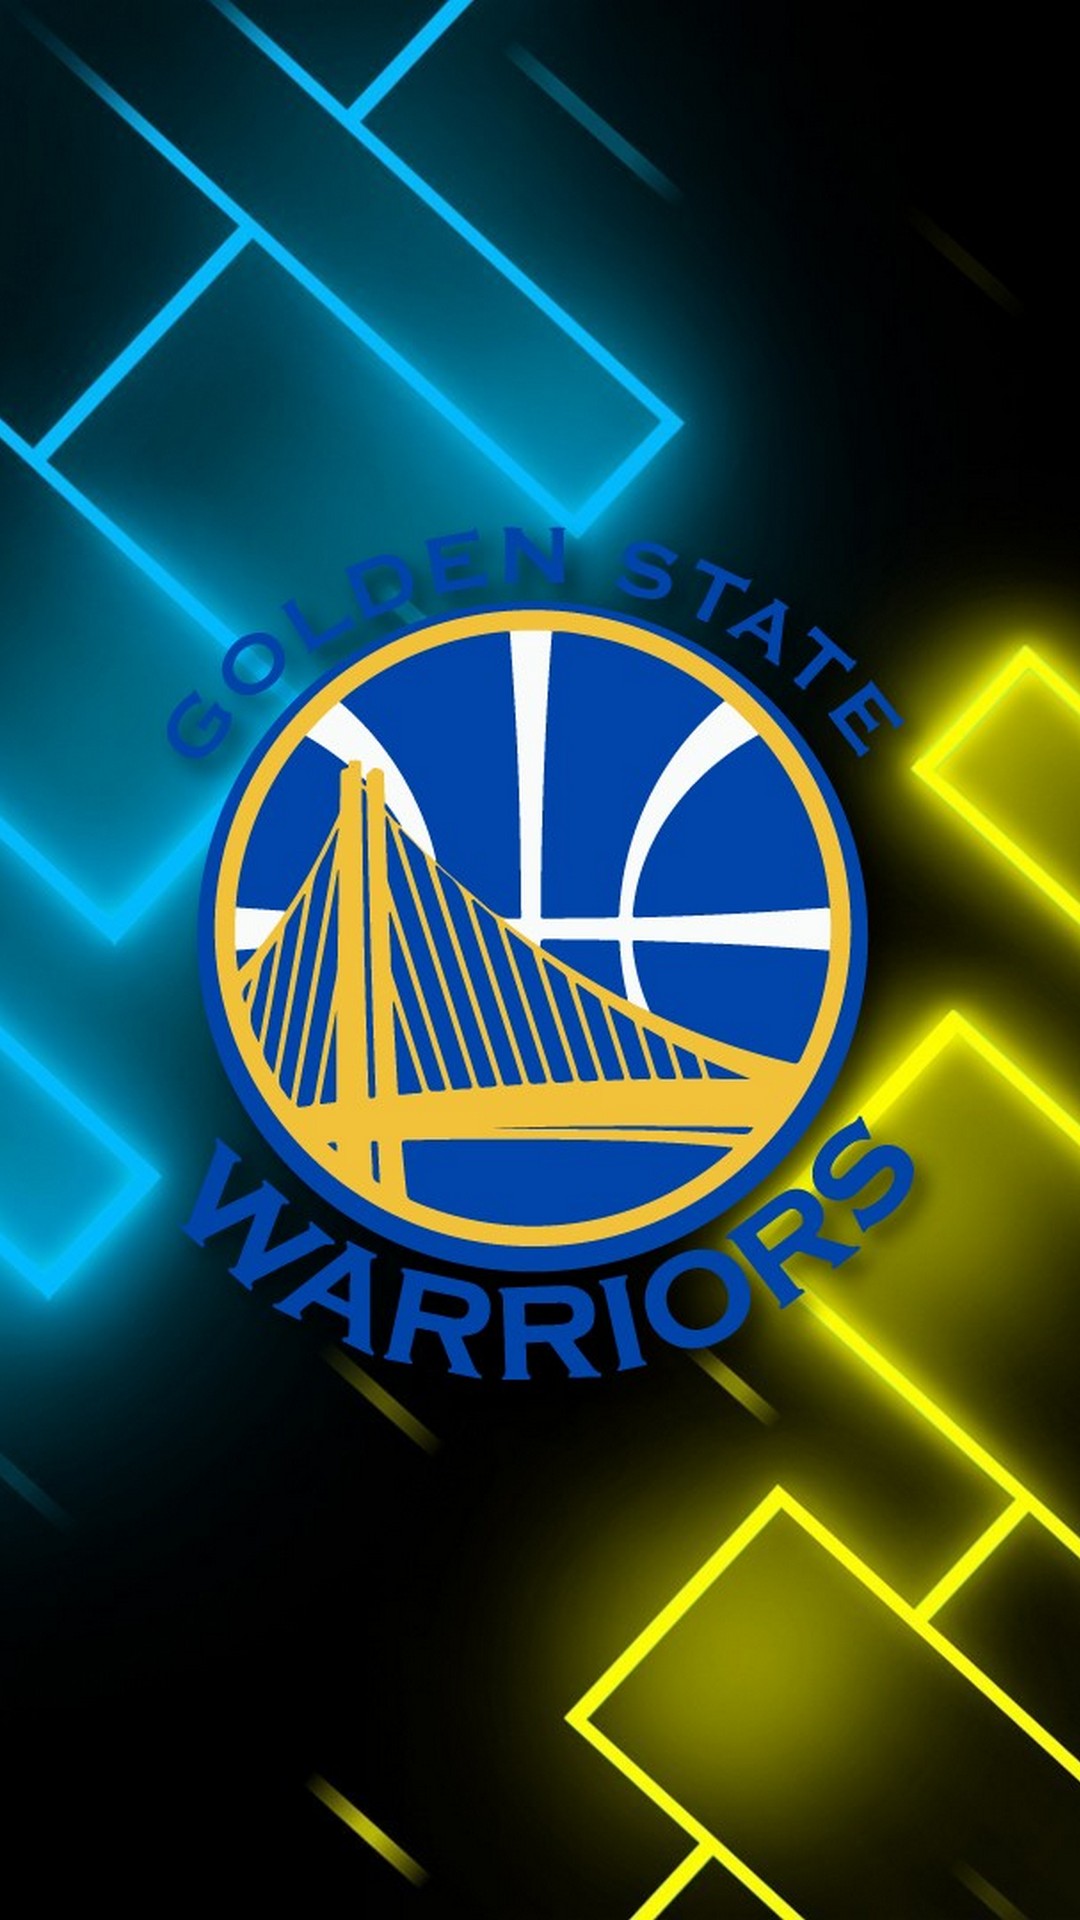 Golden State Warriors iPhone 6 Wallpaper with resolution 1080X1920 pixel. You can use this wallpaper as background for your desktop Computer Screensavers, Android or iPhone smartphones